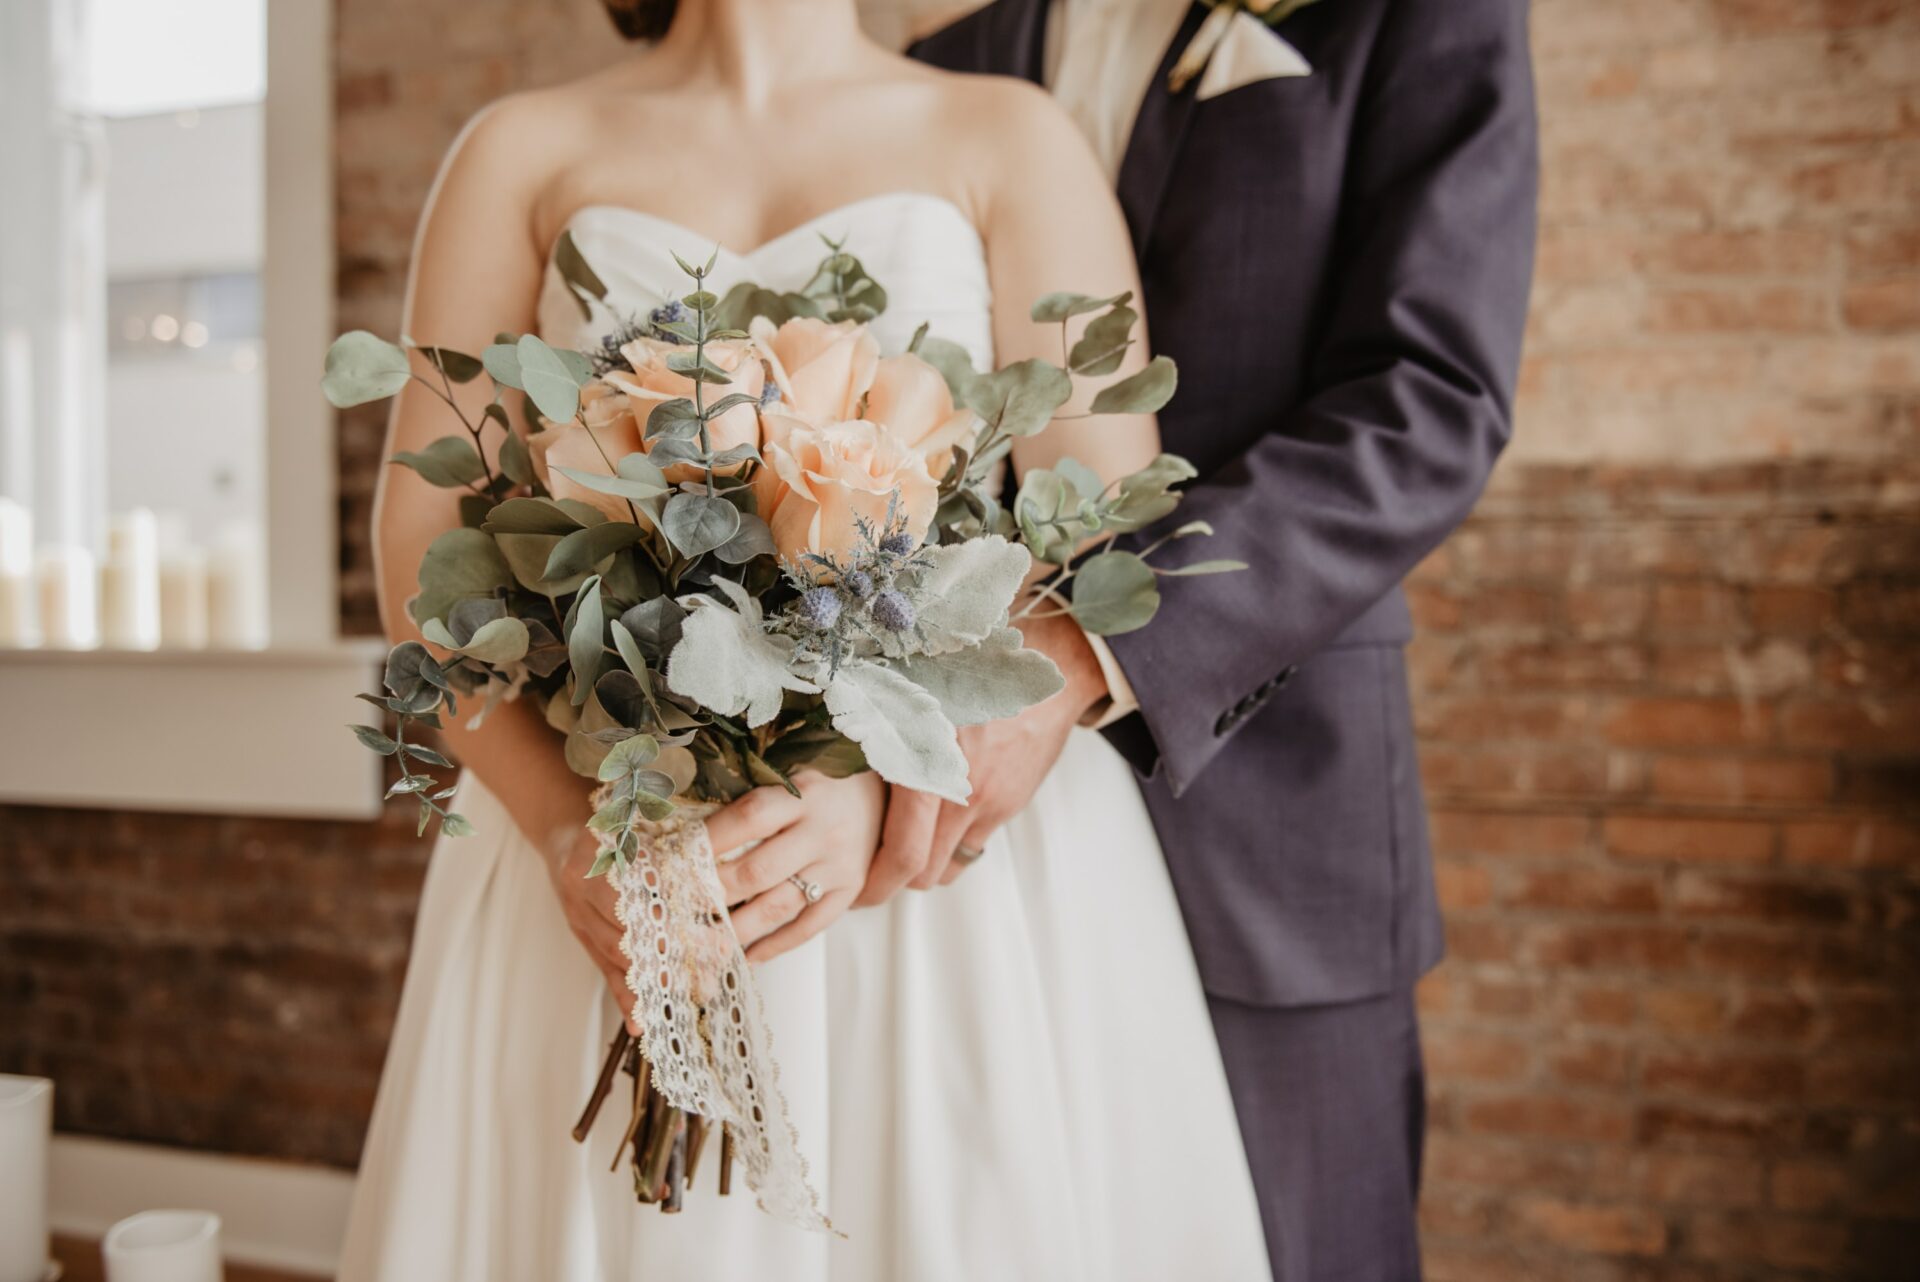 Can I Use a Payday Loan to Pay for a Wedding?